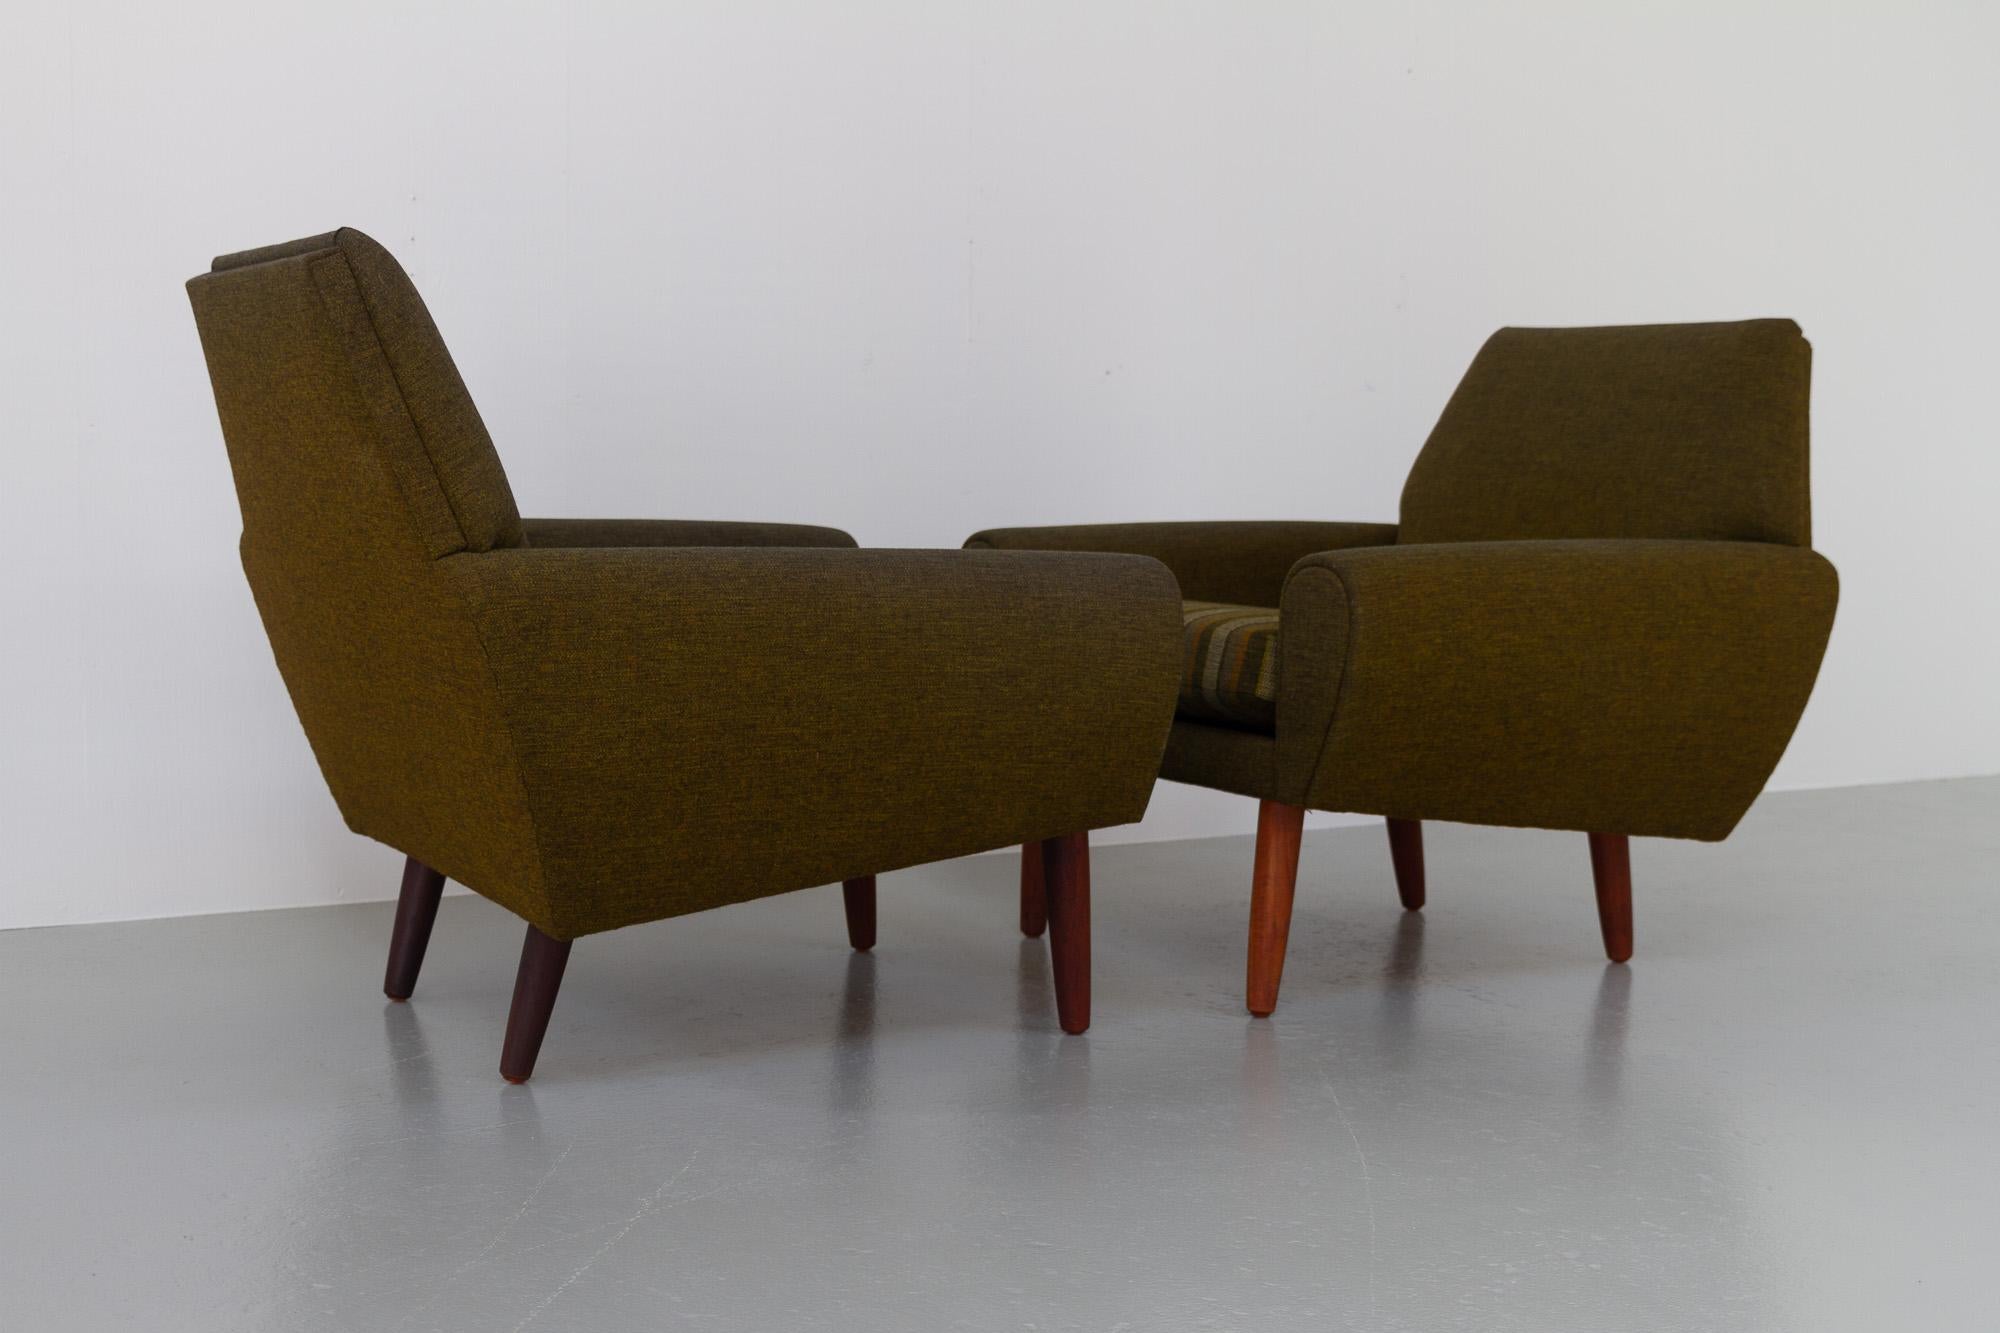 Vintage Danish Modern Lounge Chairs by Kurt Østervig for Ryesberg Møbler, 1960 In Good Condition For Sale In Asaa, DK